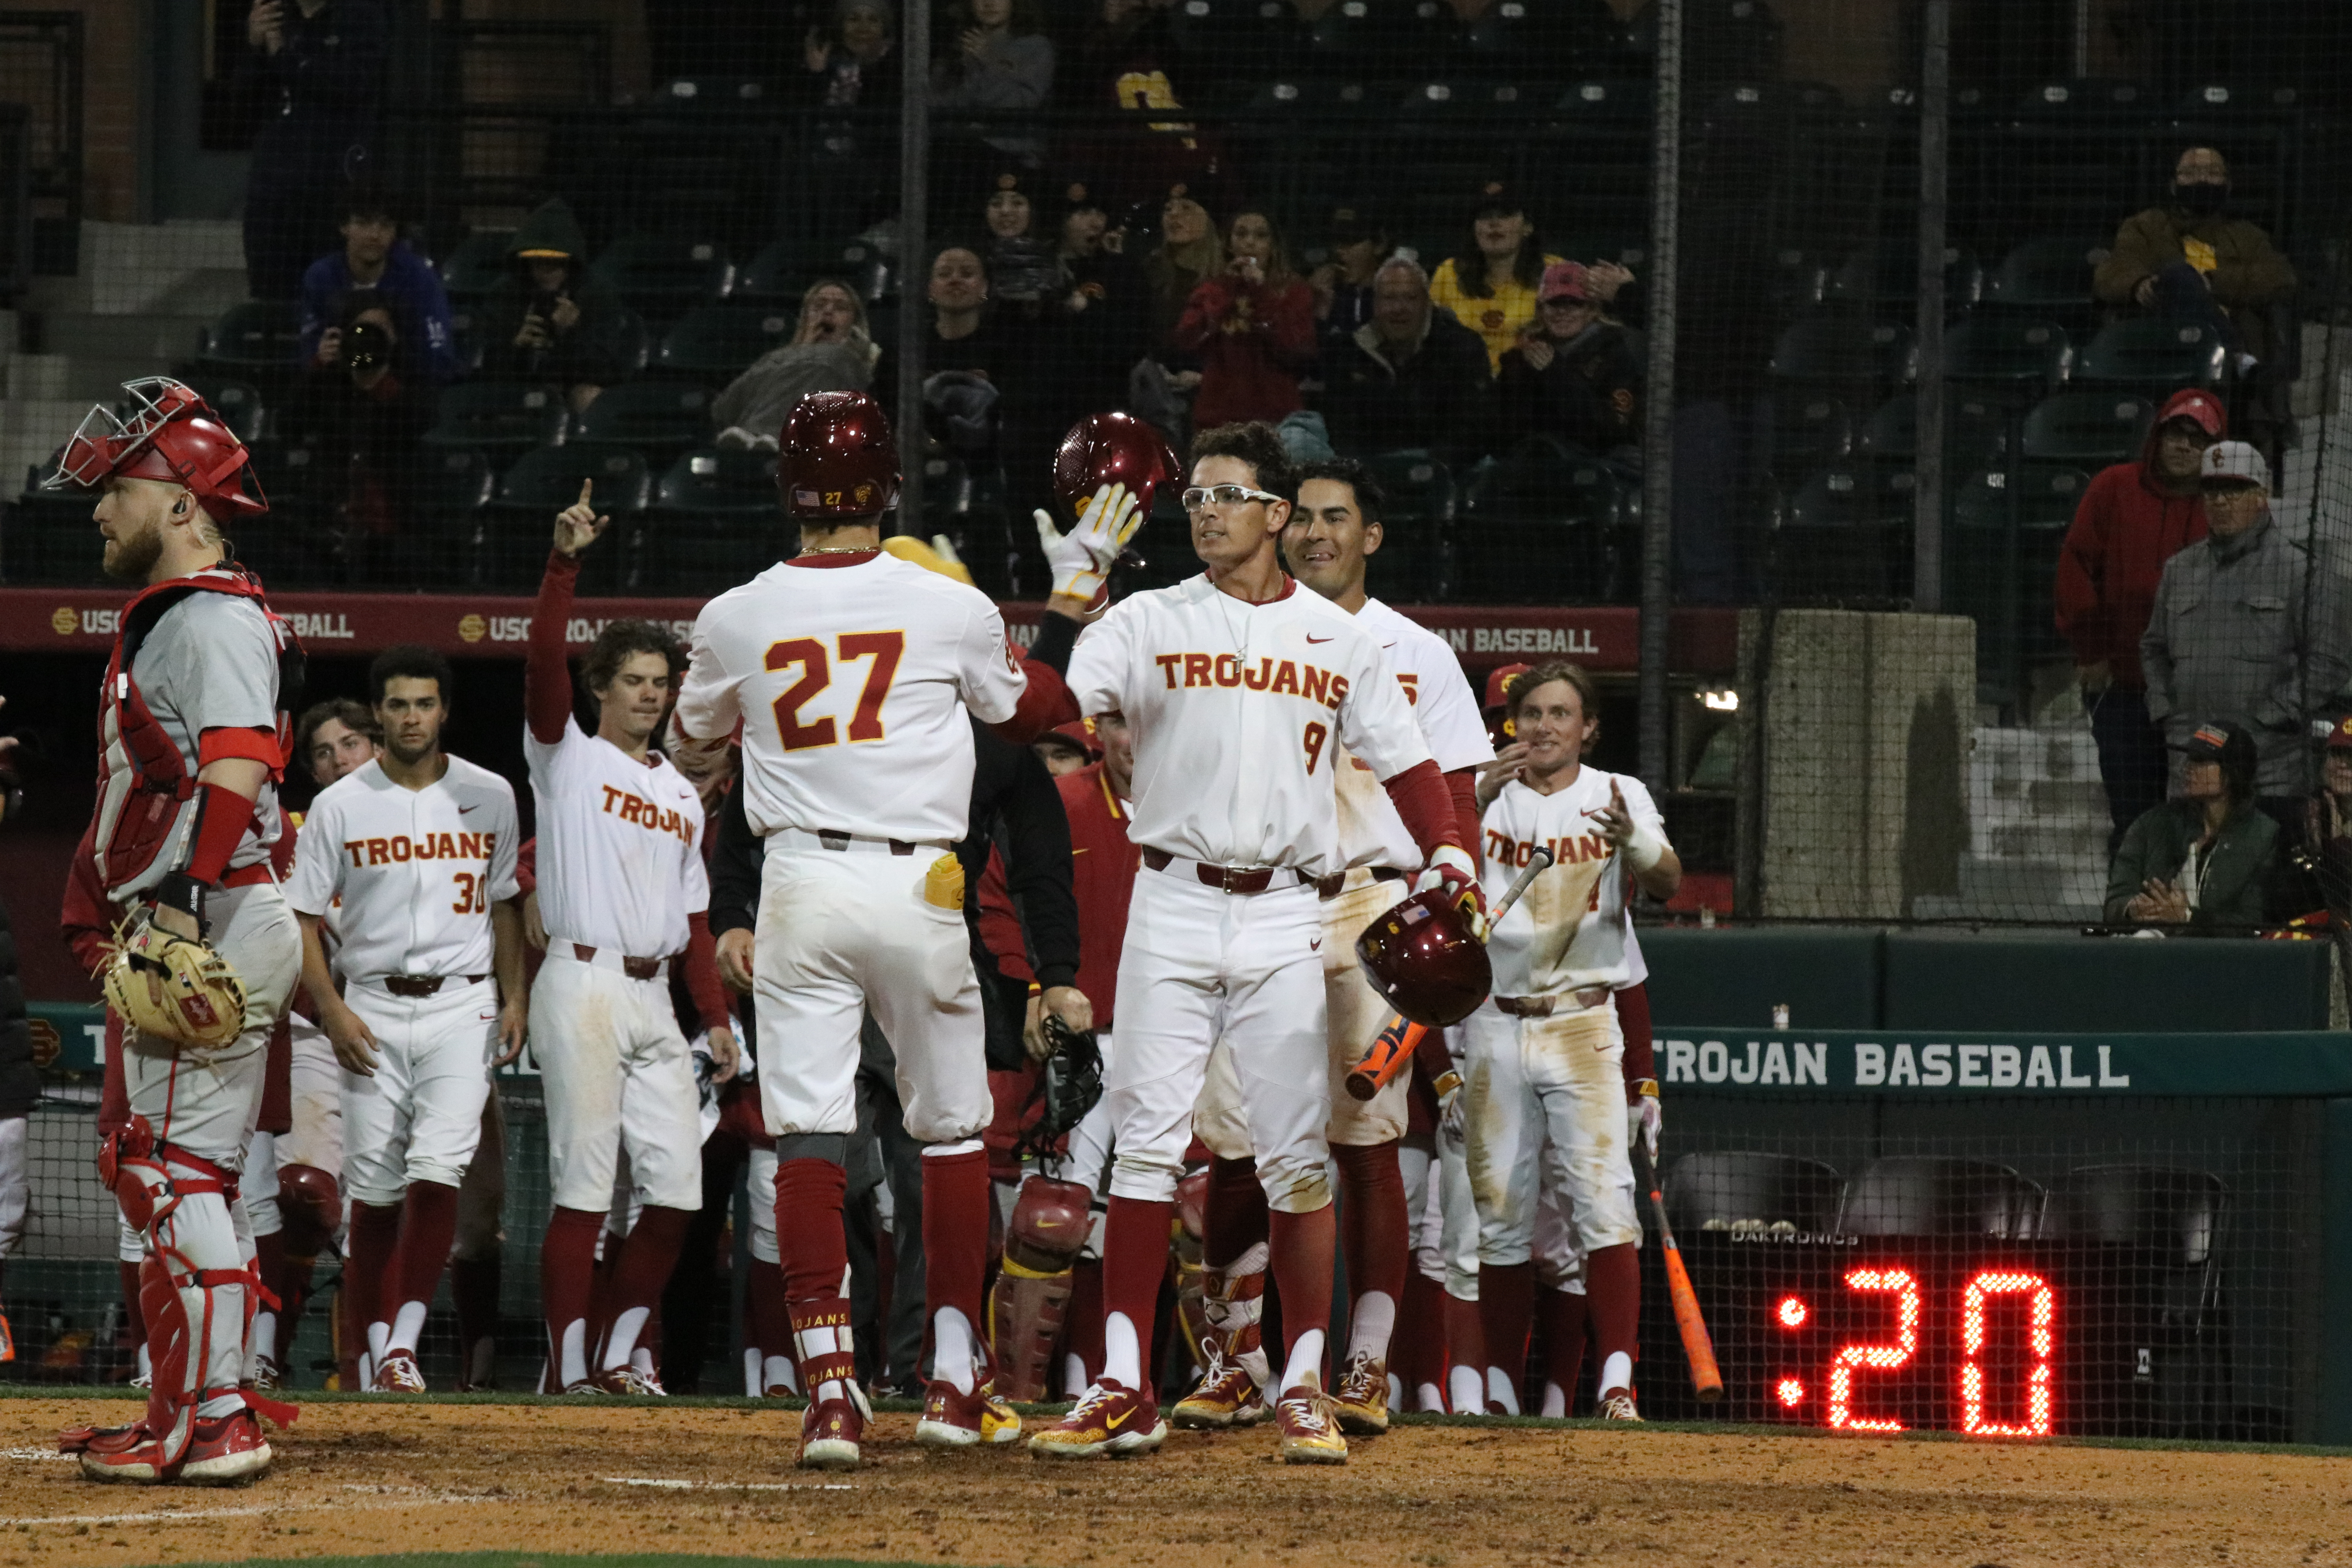 Trojans bring out the brooms in opening series sweep against